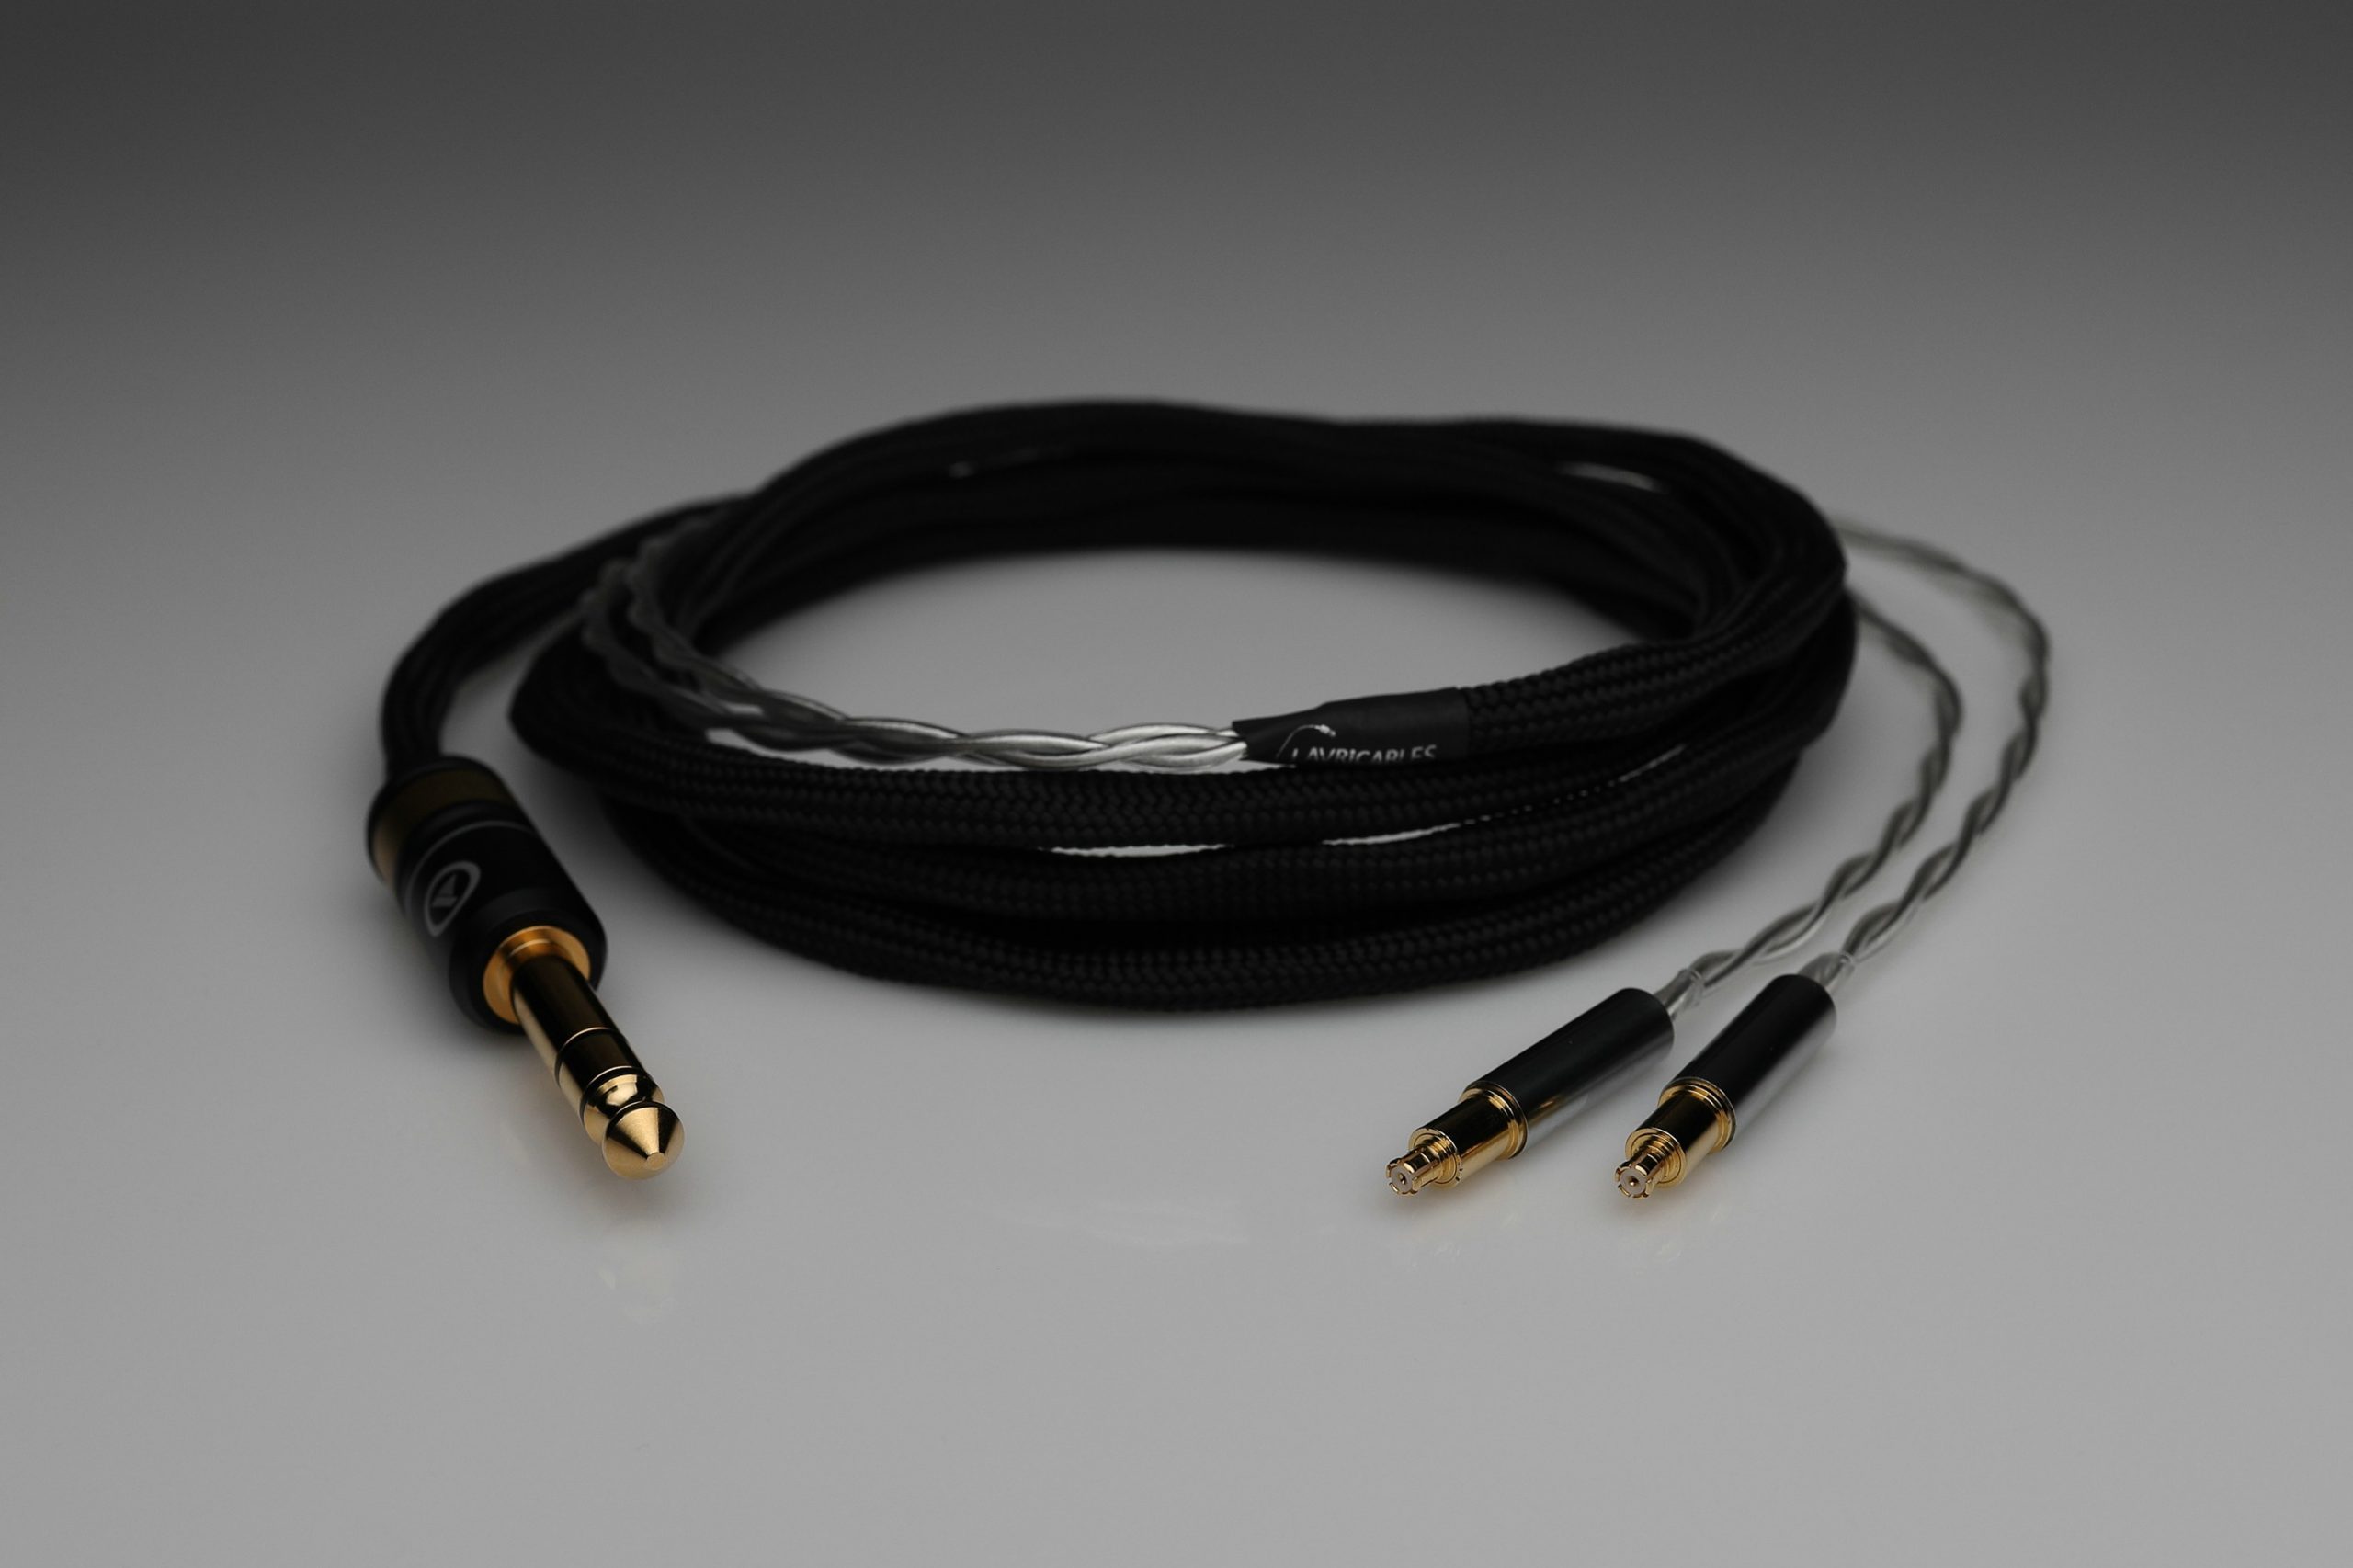 Ultimate Silver Audio Technica ATH-ESW750 ESW950 ESW990 ADX5000 WP900  AP2000 Ti ATH-AWKT ATH-AWAS upgrade cable